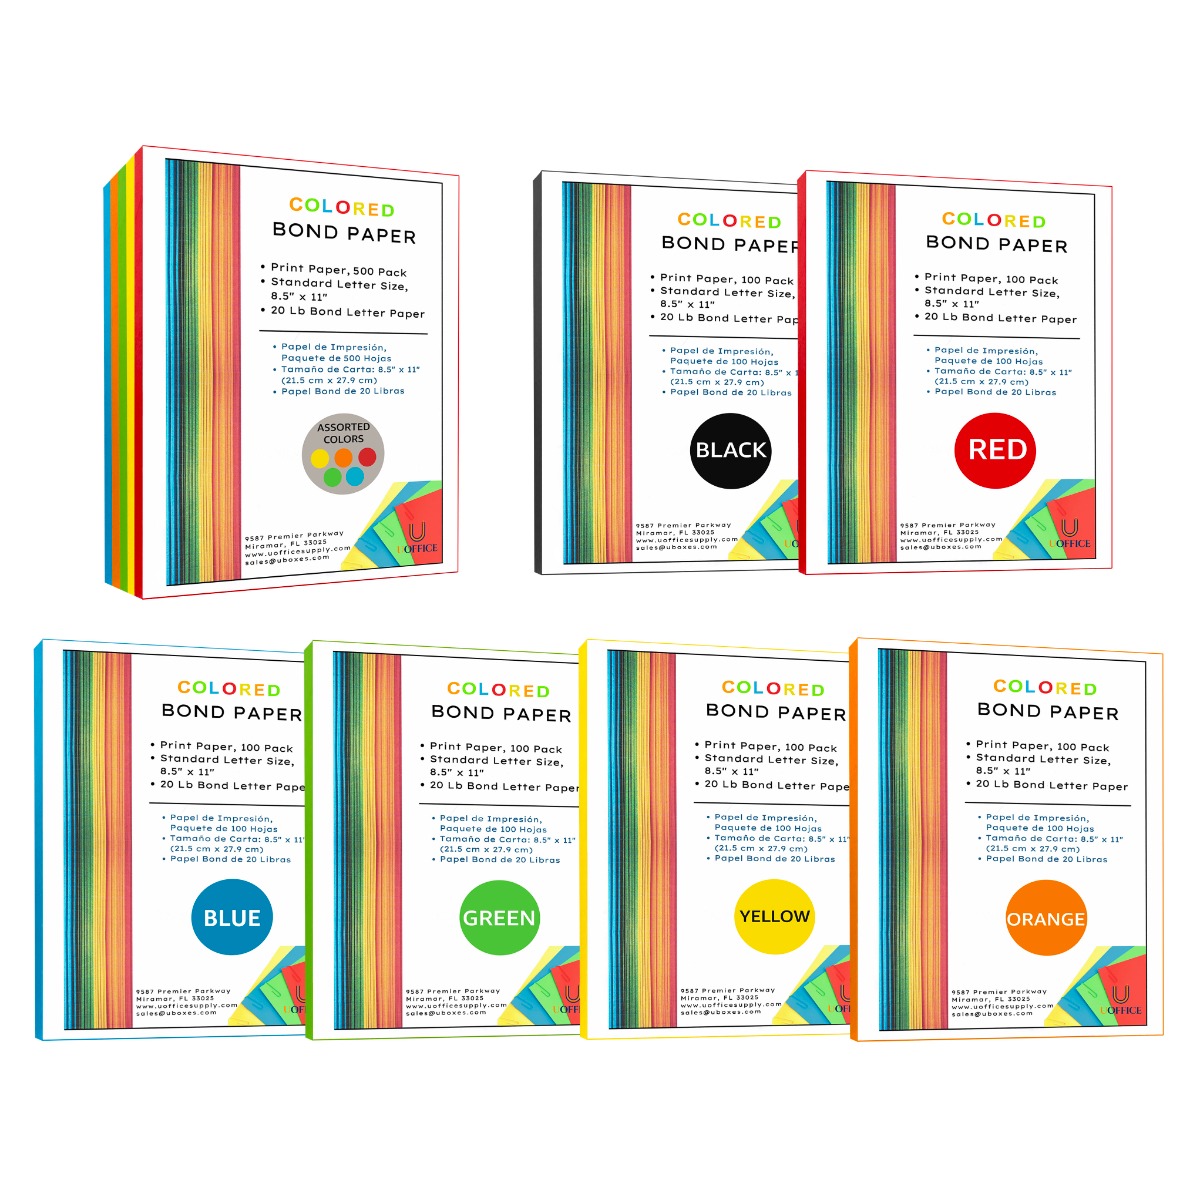 Uoffice Colored Bond Paper Bundle 8.5 inch x 11 inch, 20lbs, 500 Pages, Multicolor